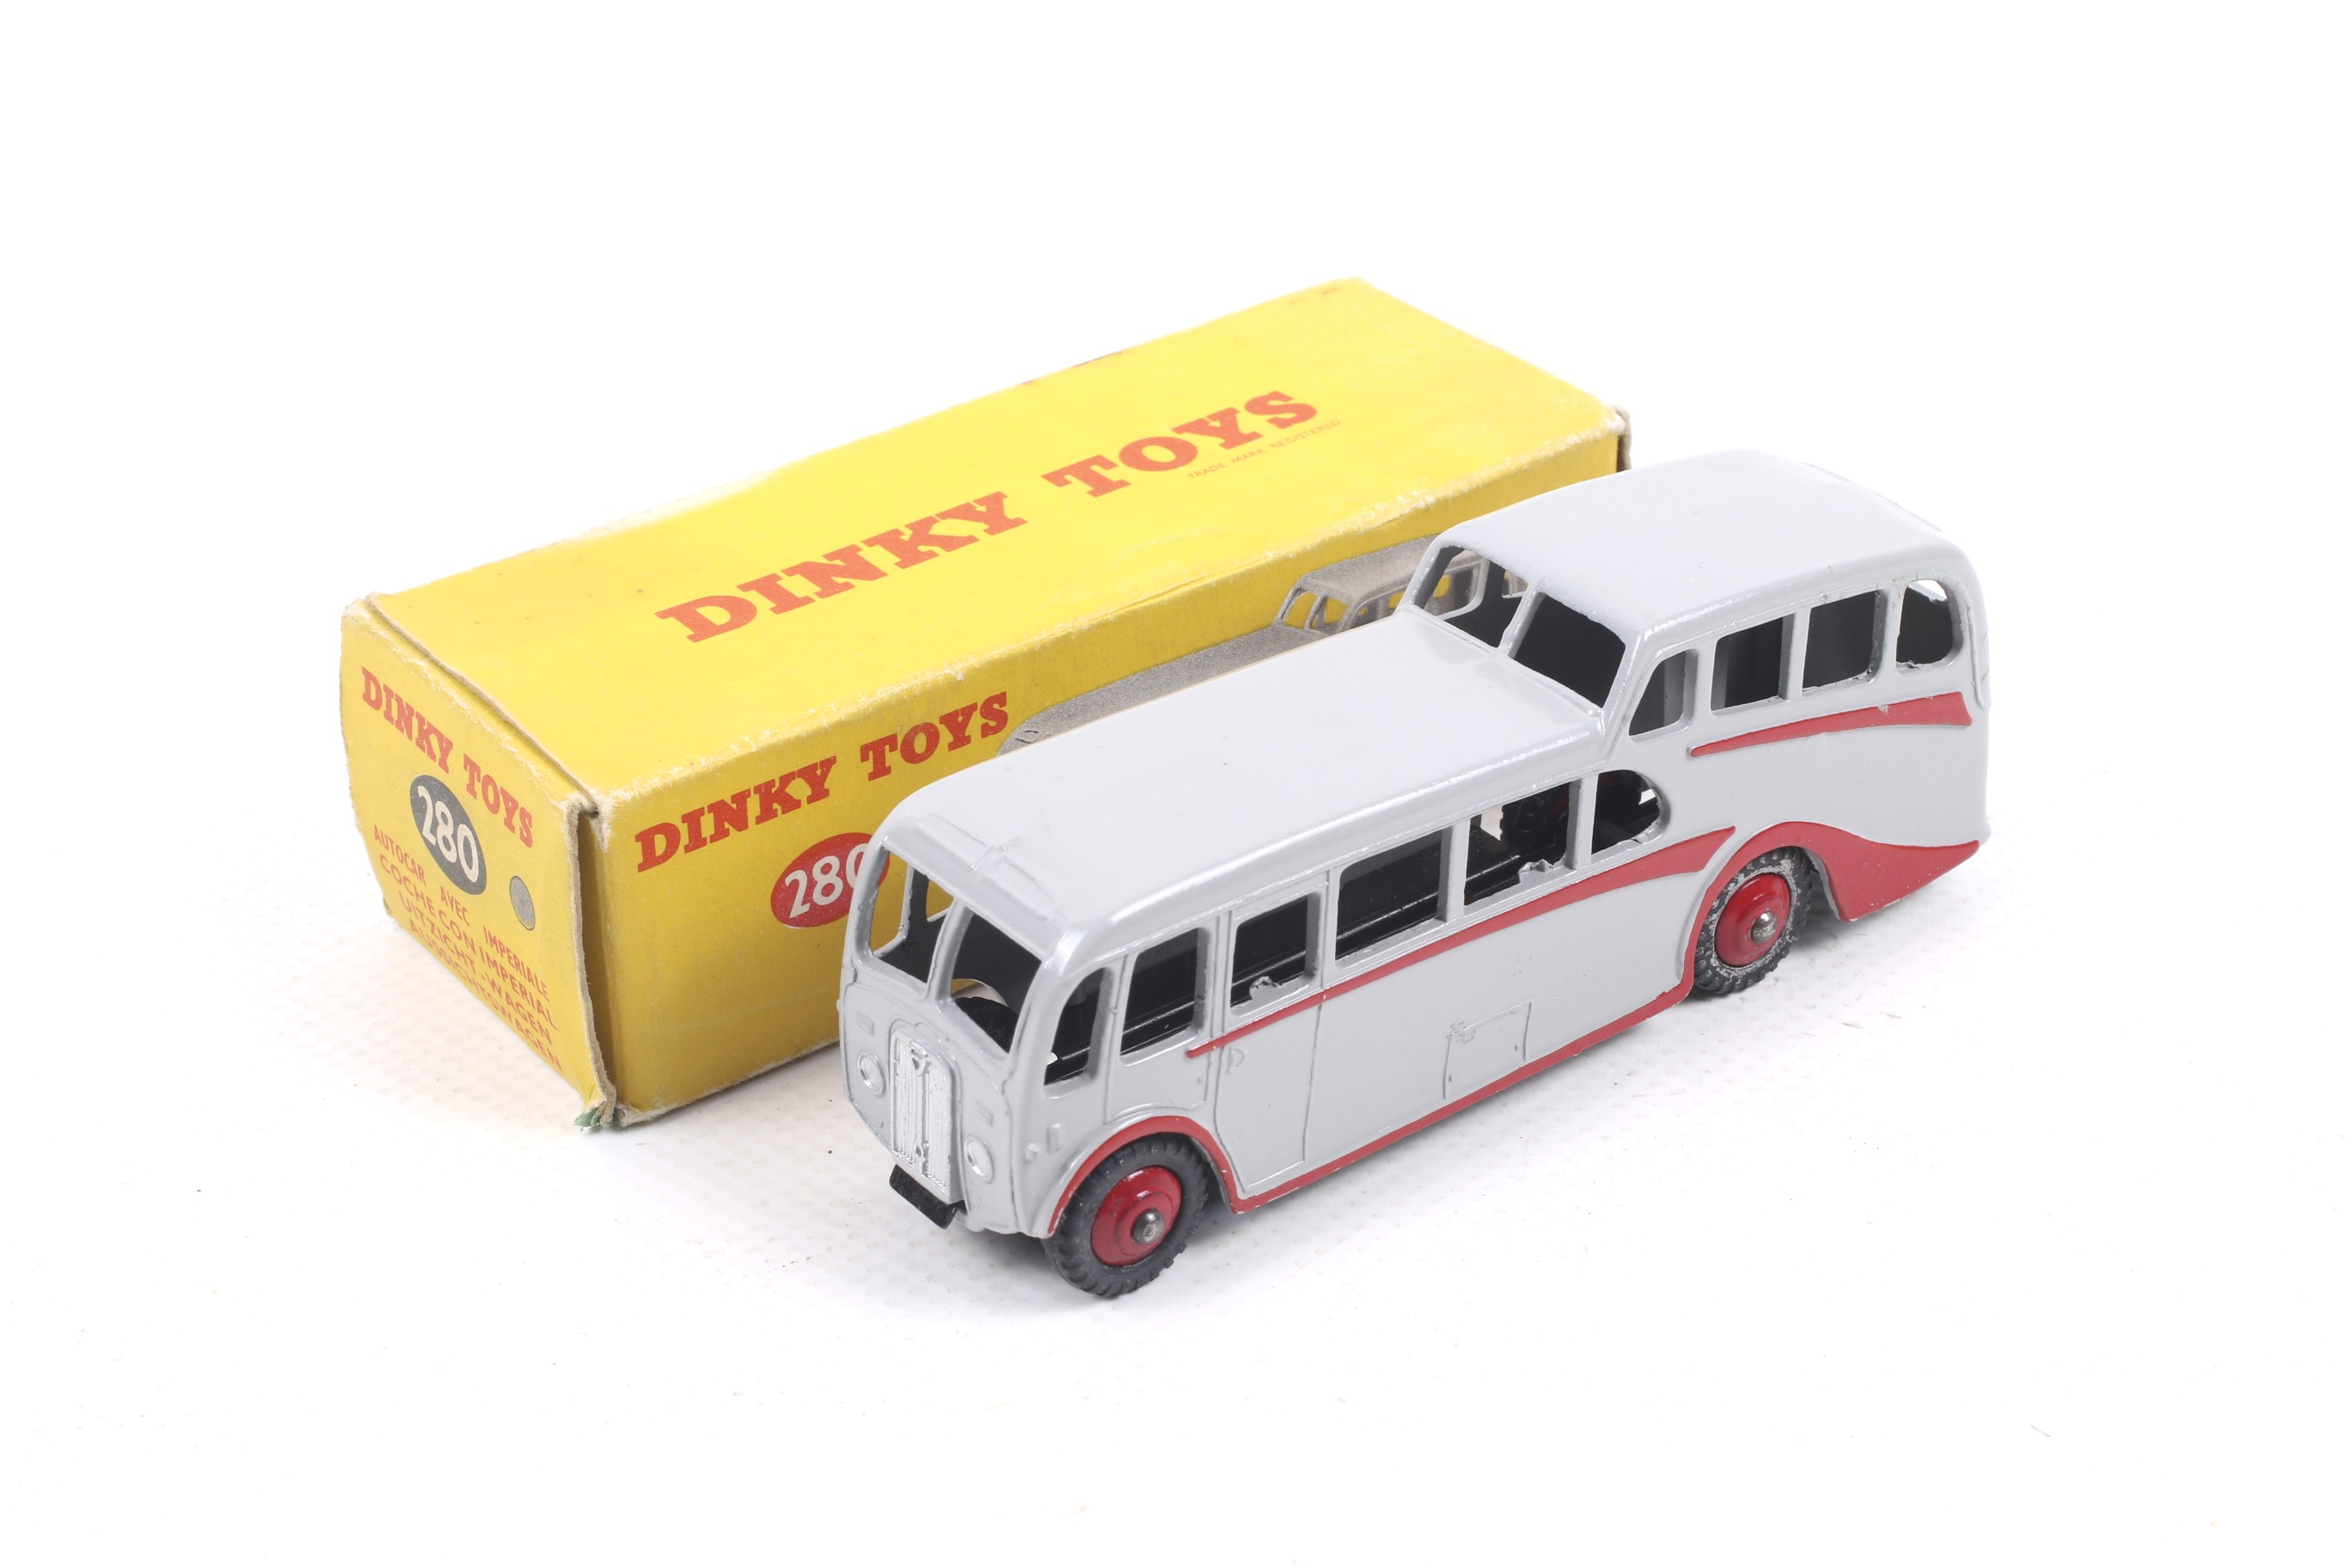 A Dinky diecast Observation Coach. No. 280, grey body with red trim and wheels, in original box.